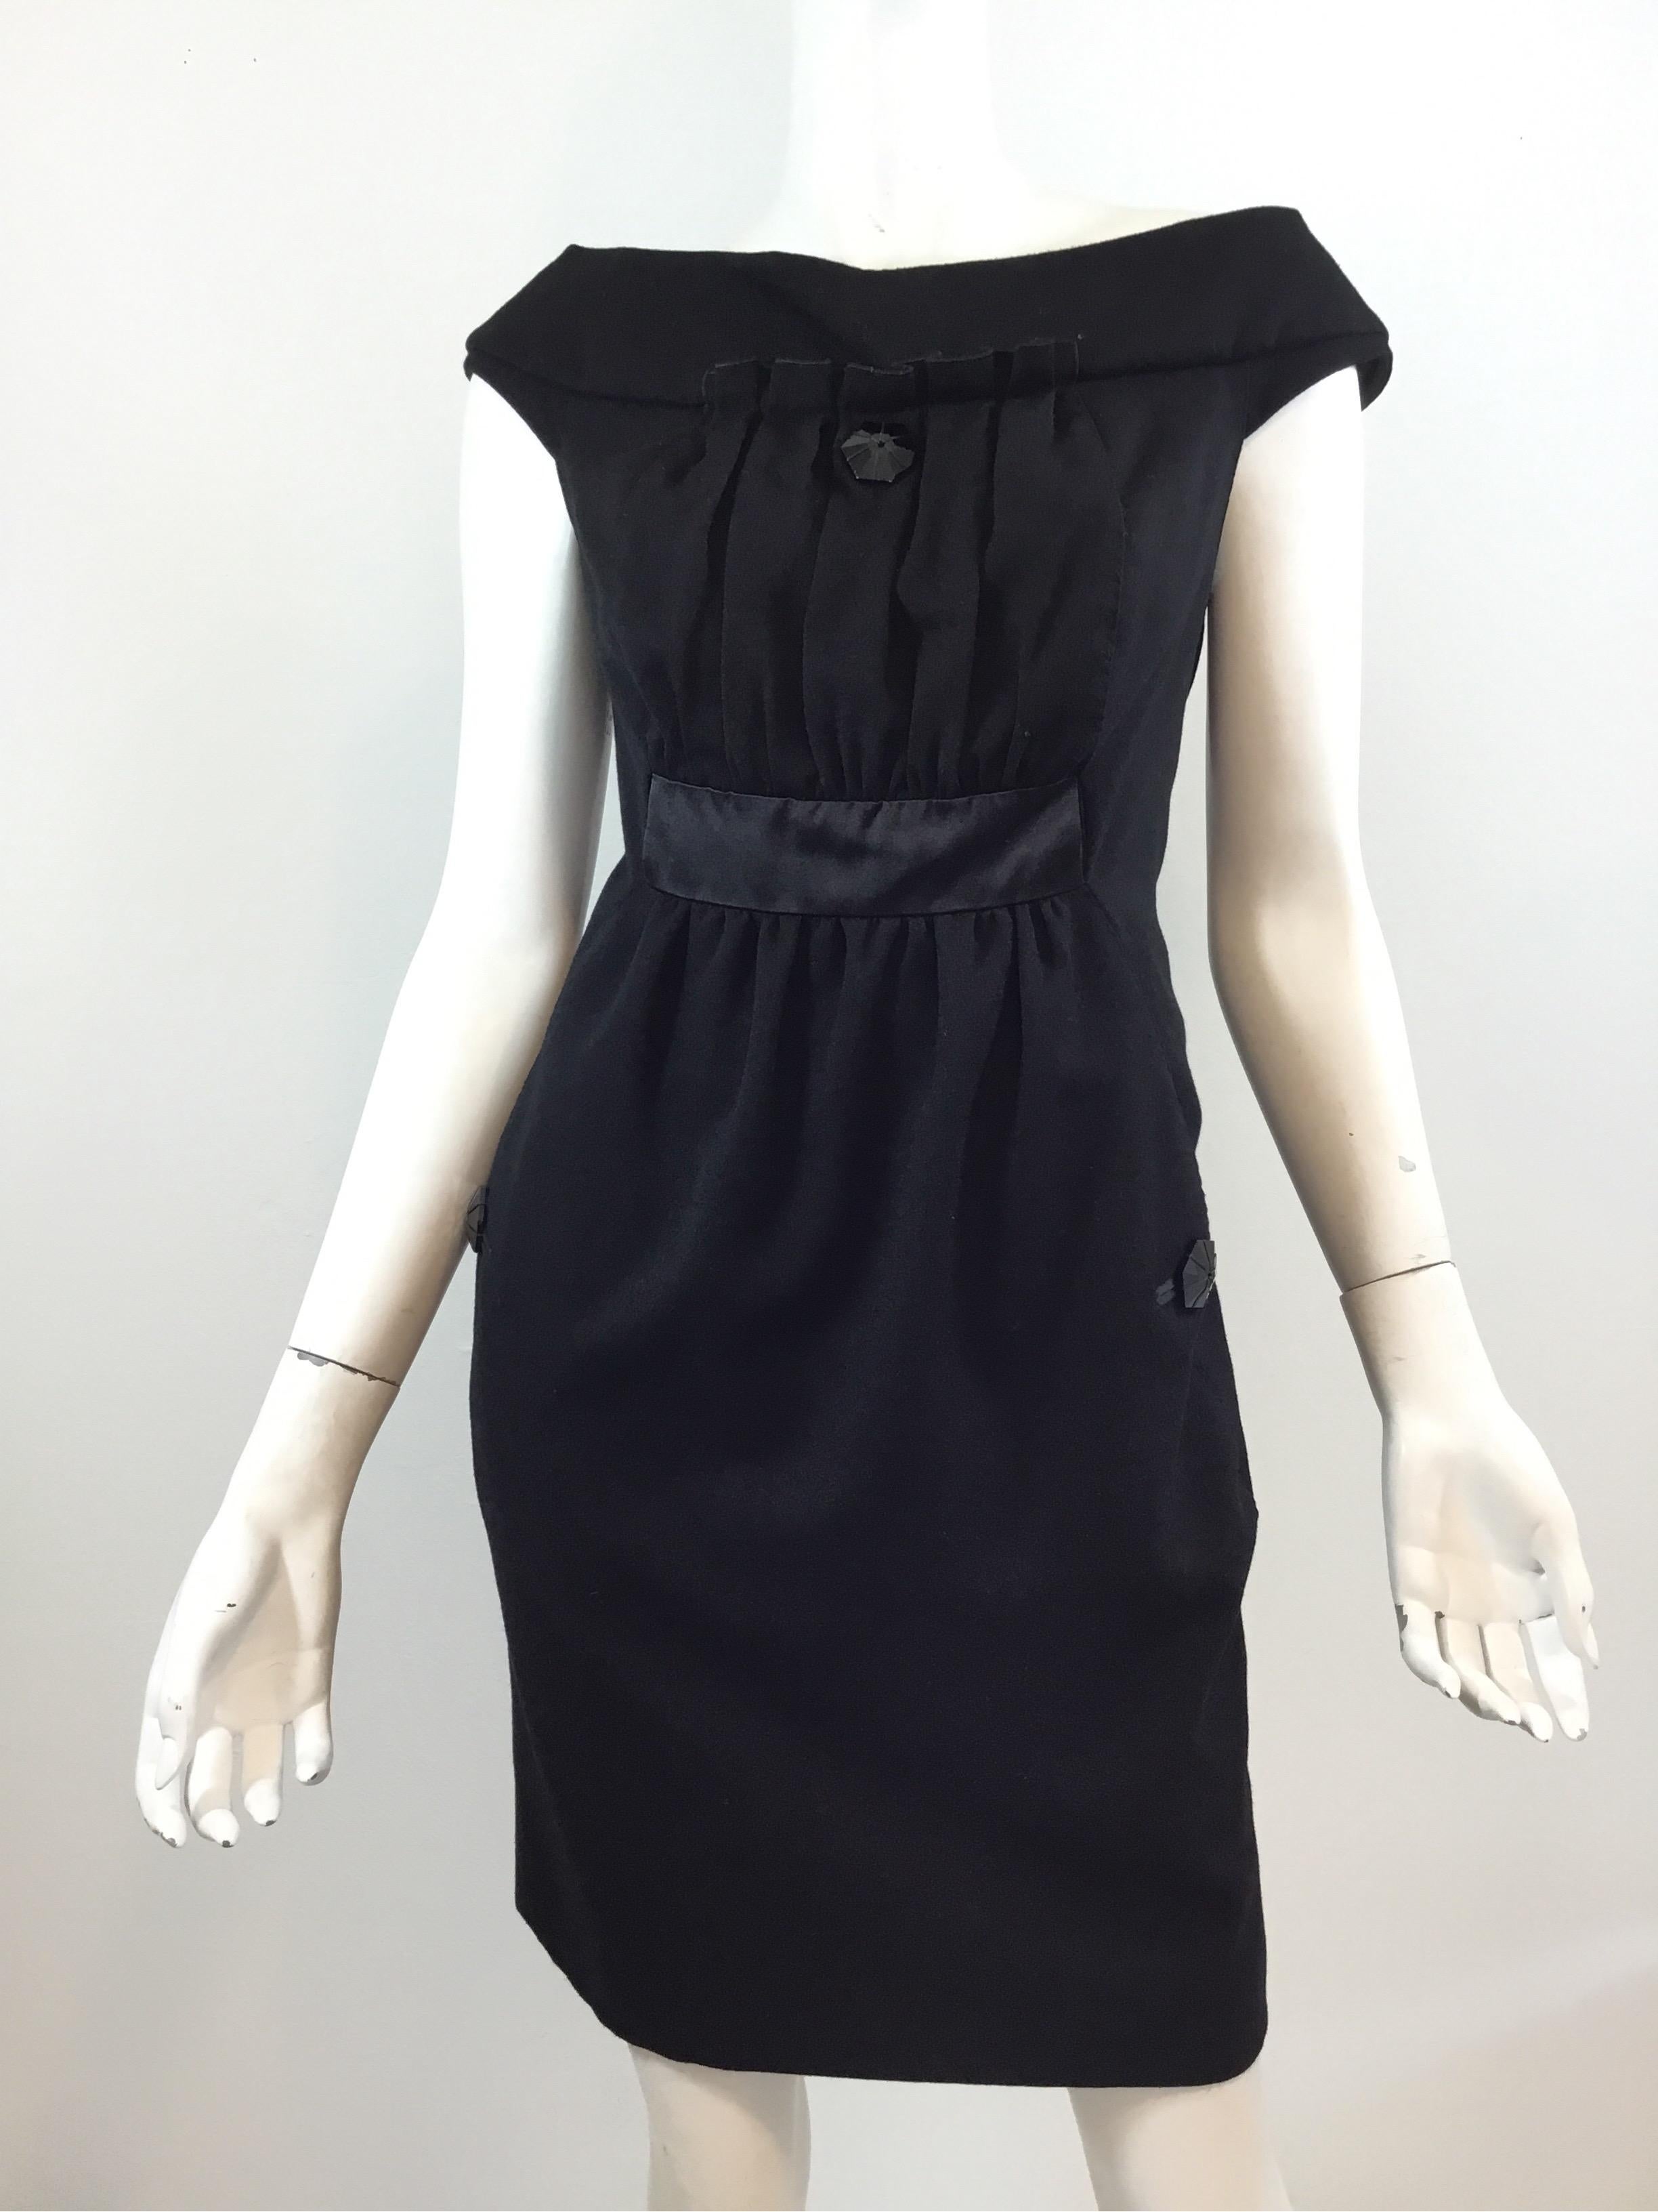 Louis Vuitton little black dress with large bead embellishing at the center neckline and at the pockets. Dress features a boat neck style and a satin band at the waist line with insert holes for a belt. Dress has a full silk lining and back zipper